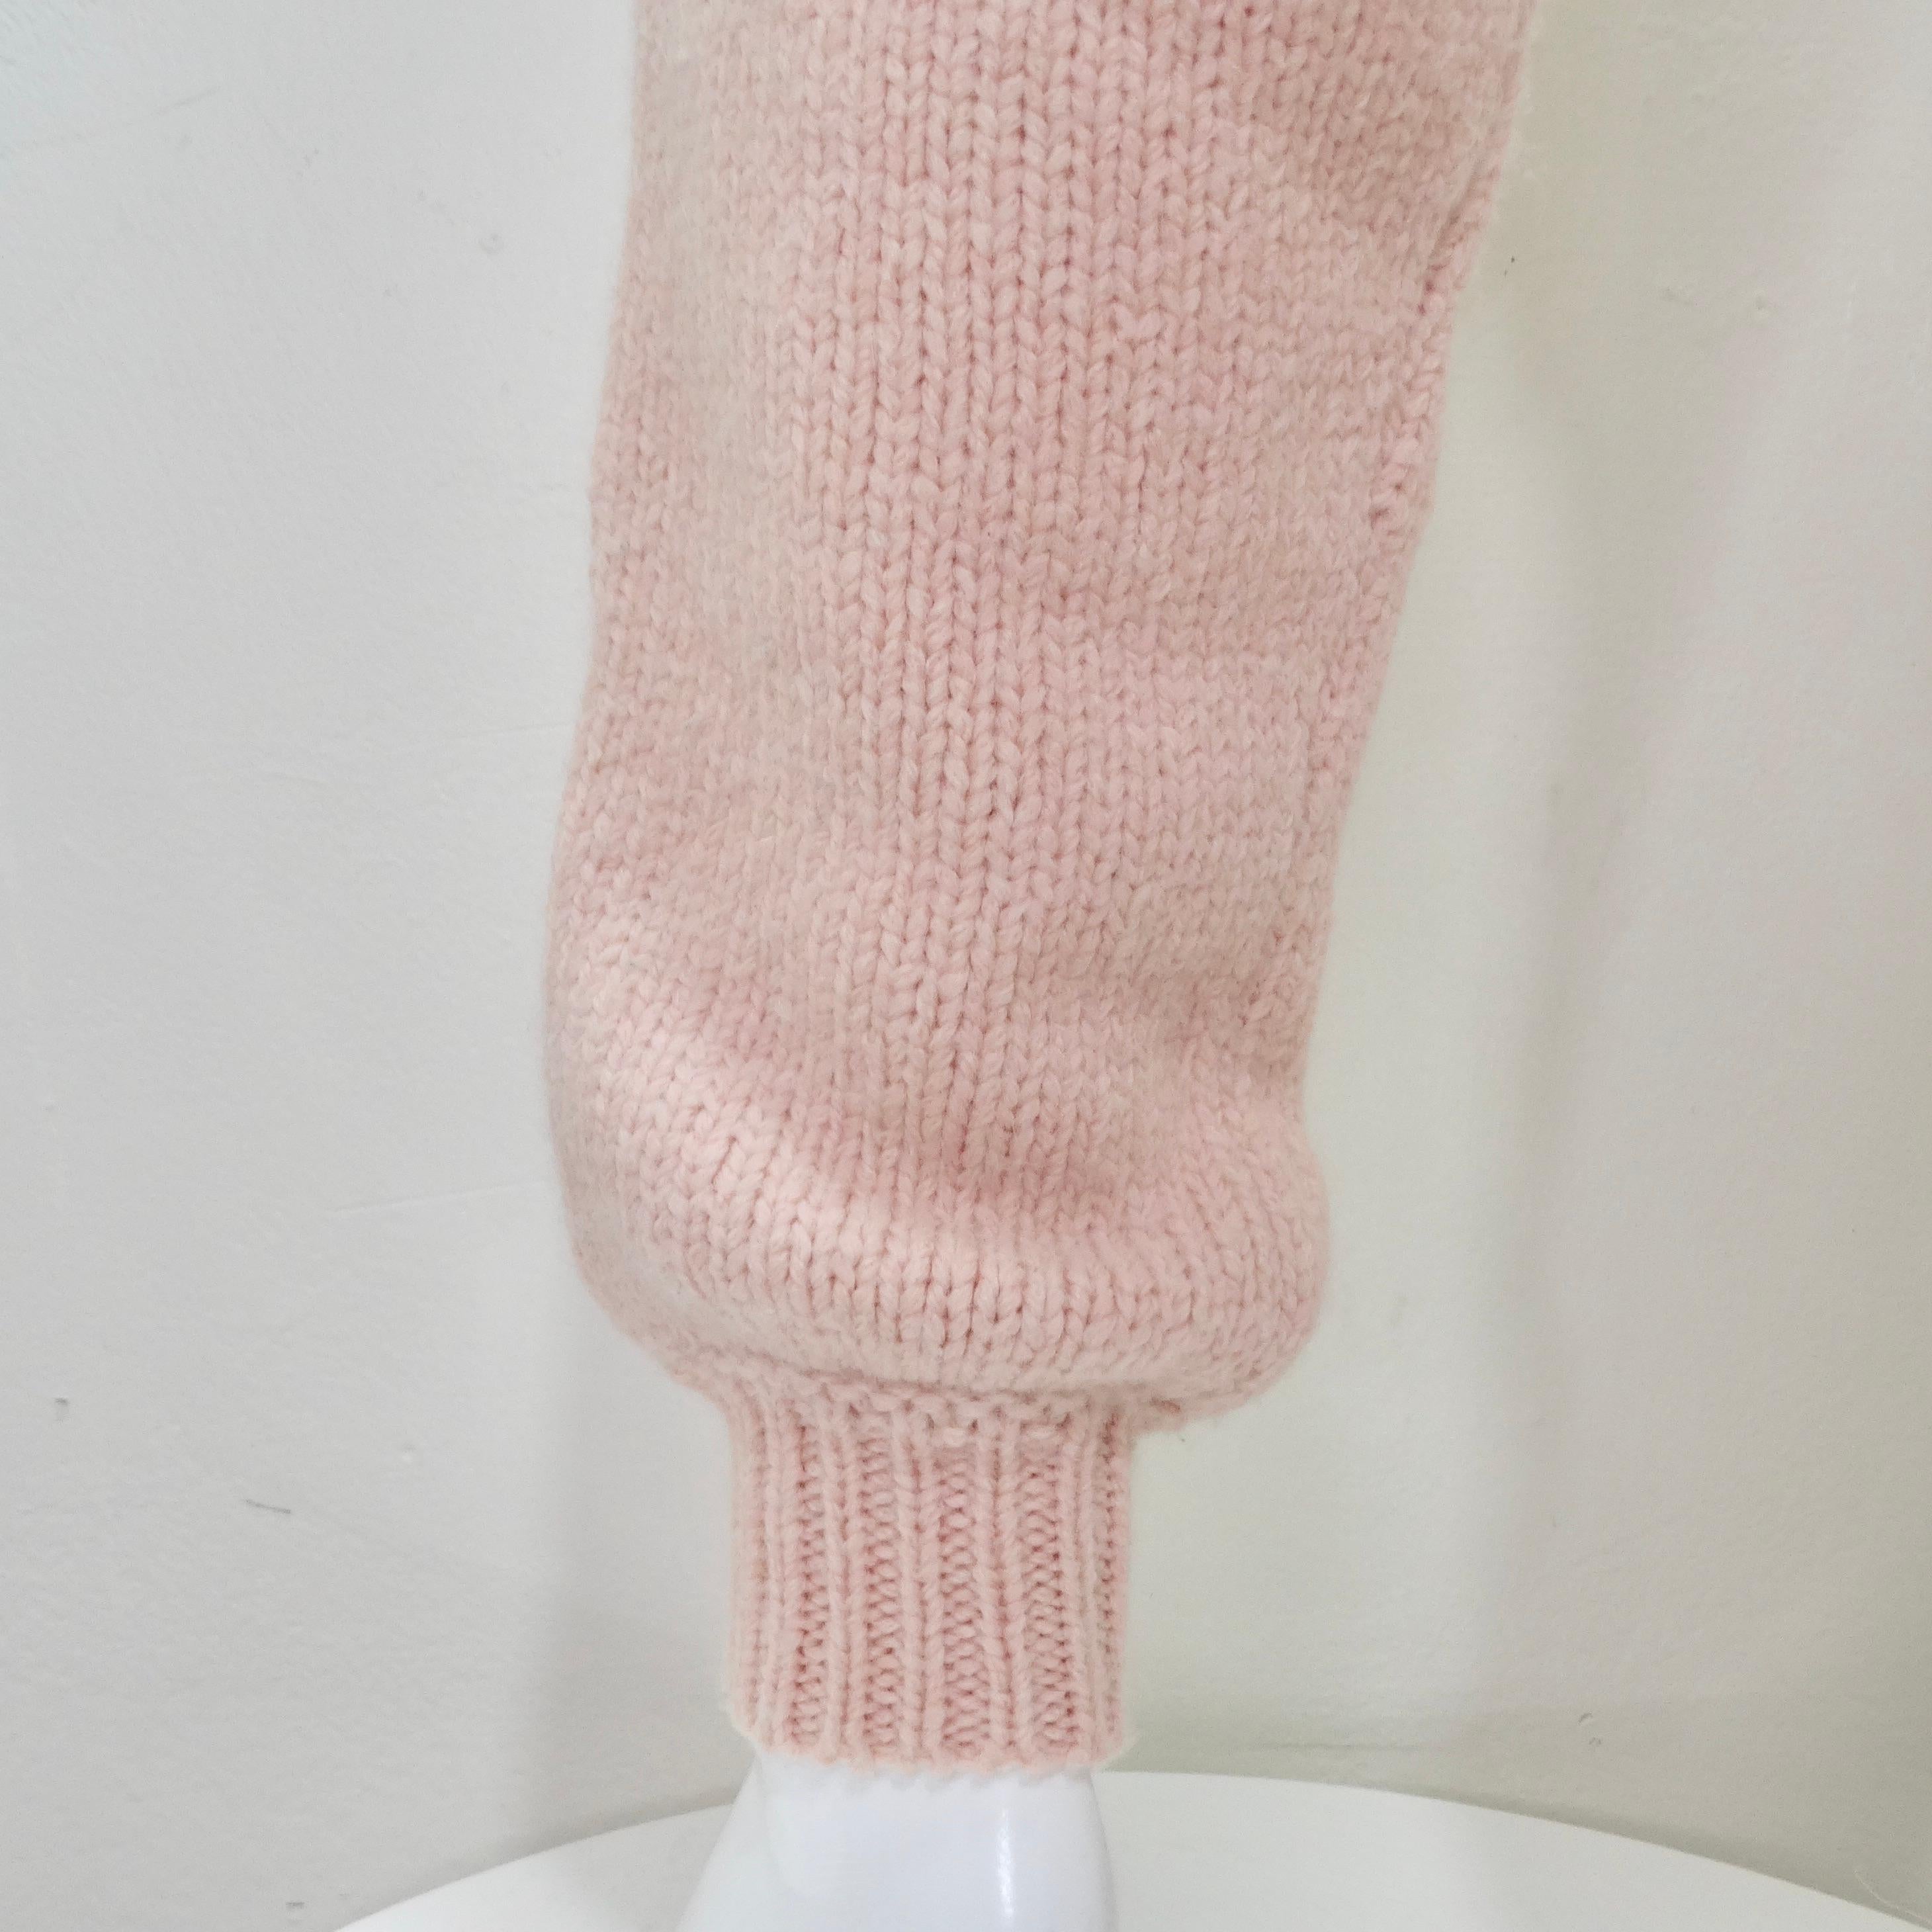 Chanel Pre Fall 2021 Pink Alpaca Knit Jogger Sweatpants In Excellent Condition For Sale In Scottsdale, AZ